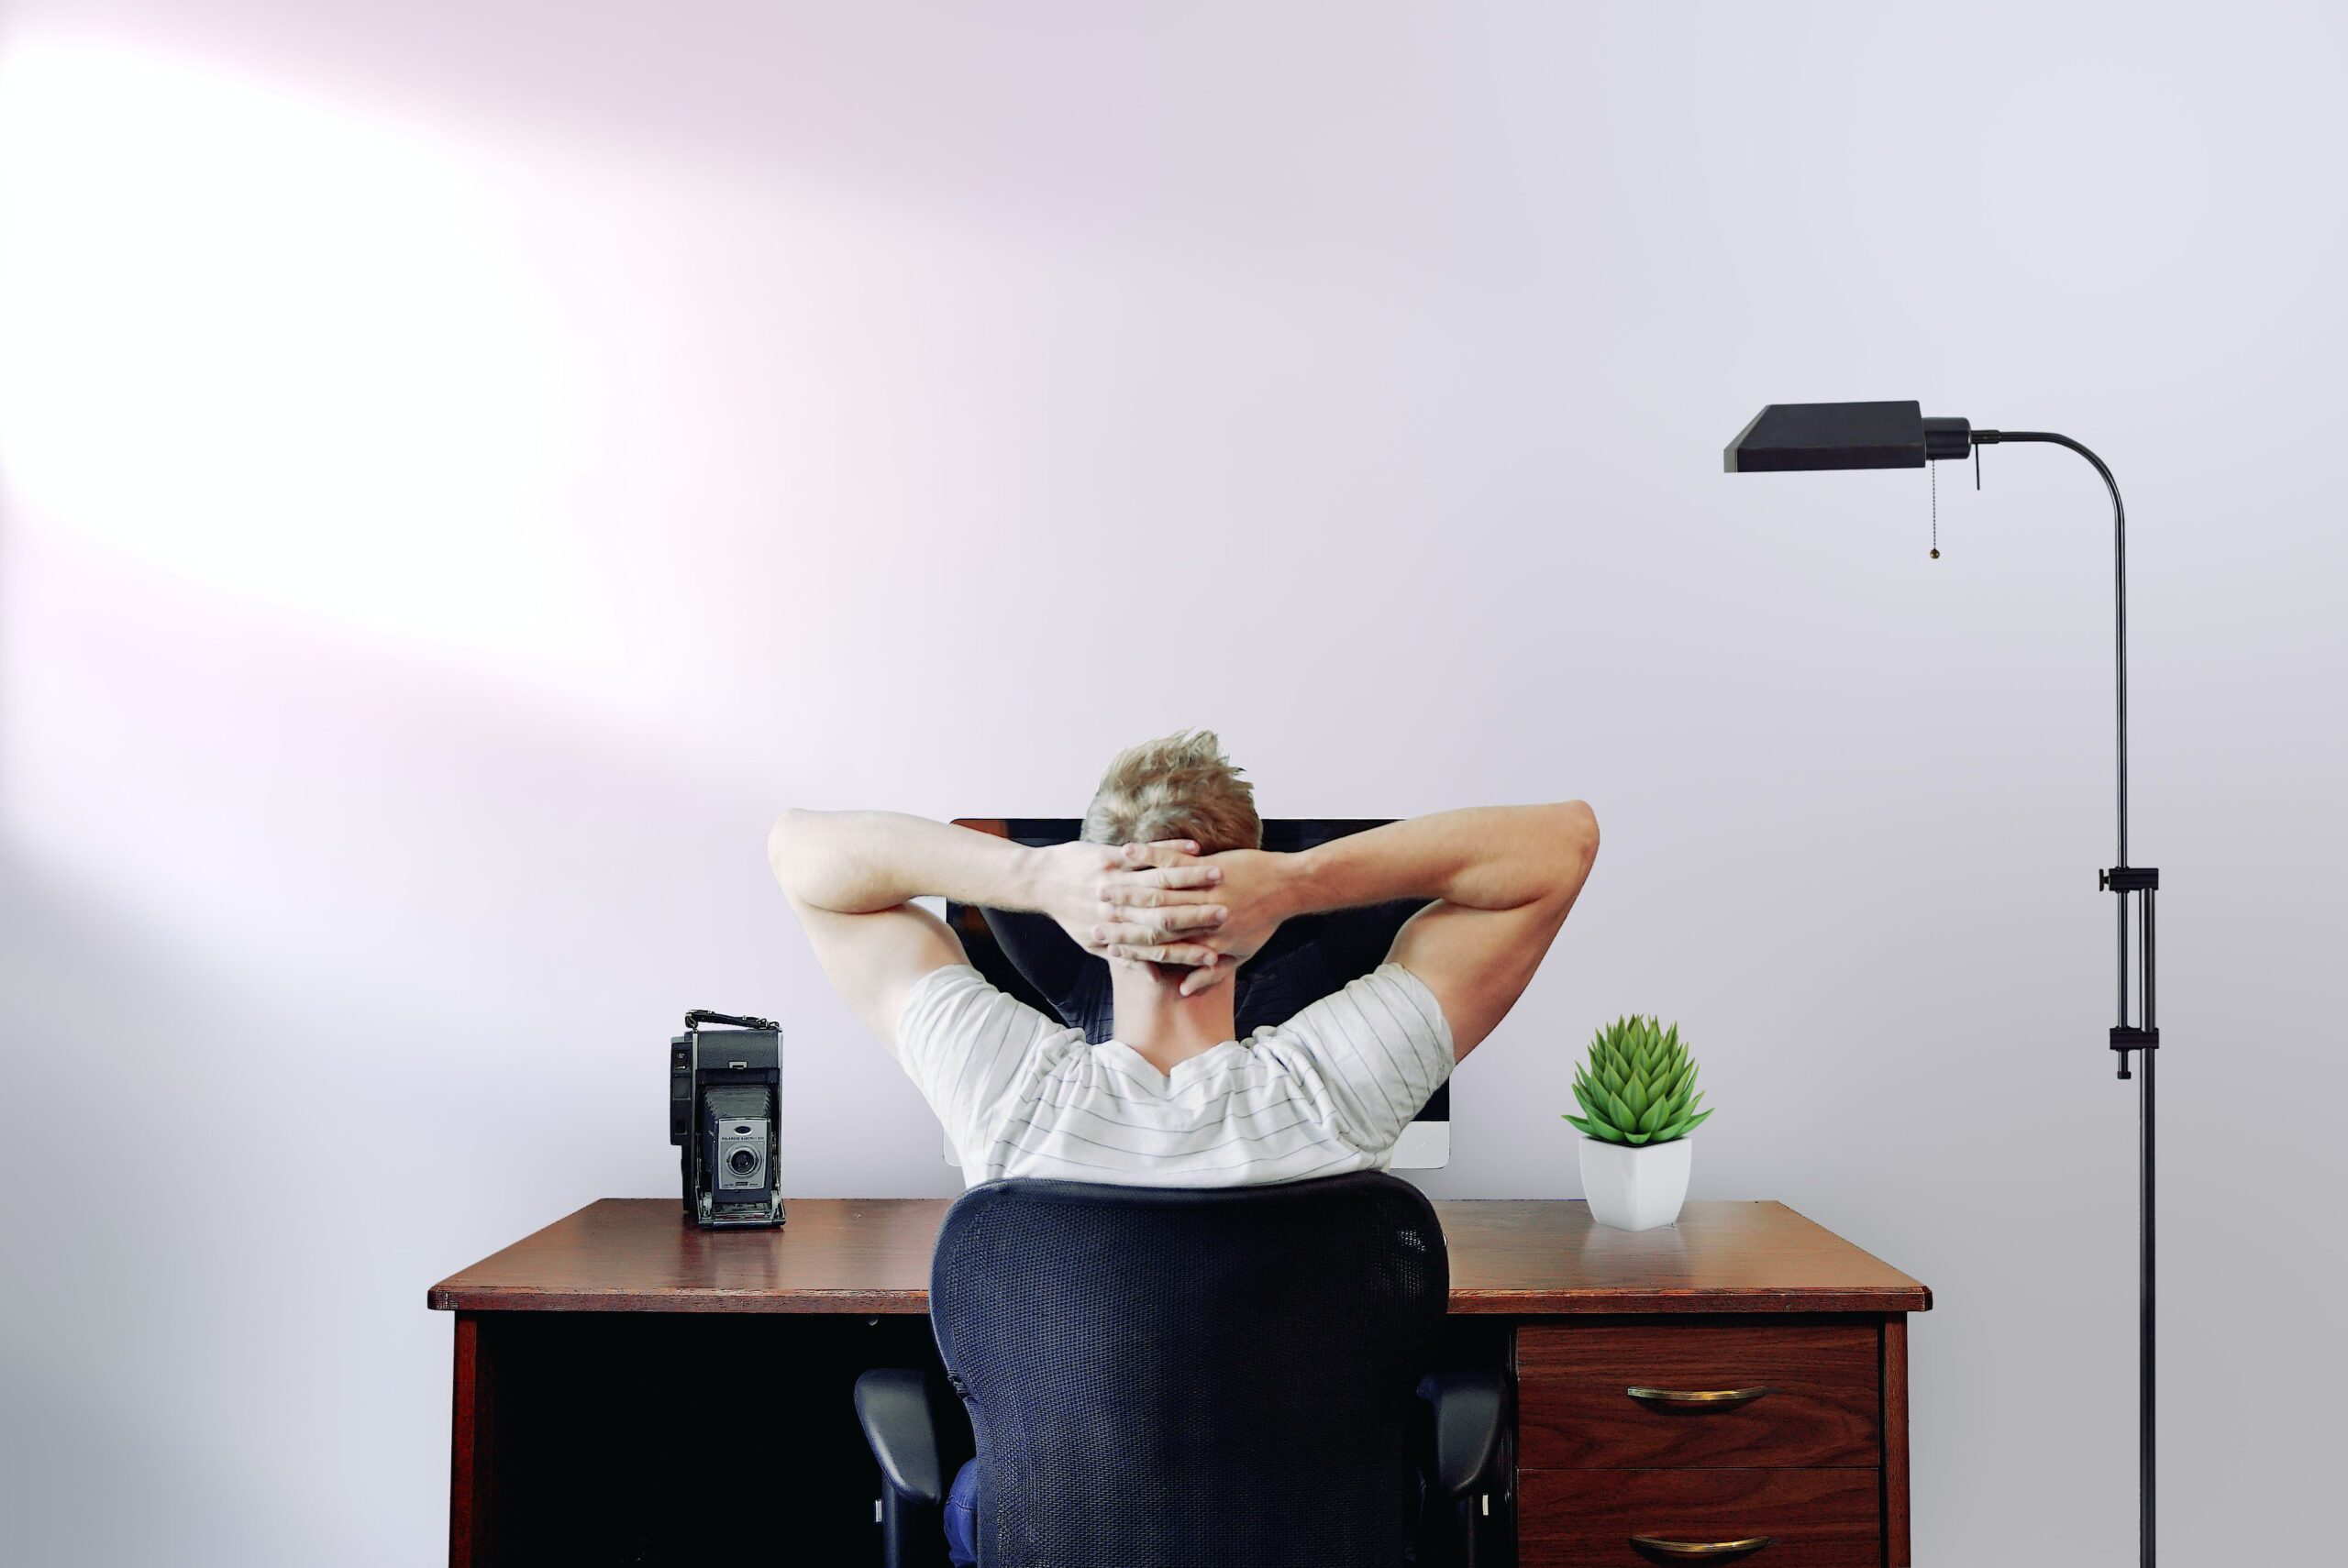 5 Desk Stretches to Make Your Workday Better